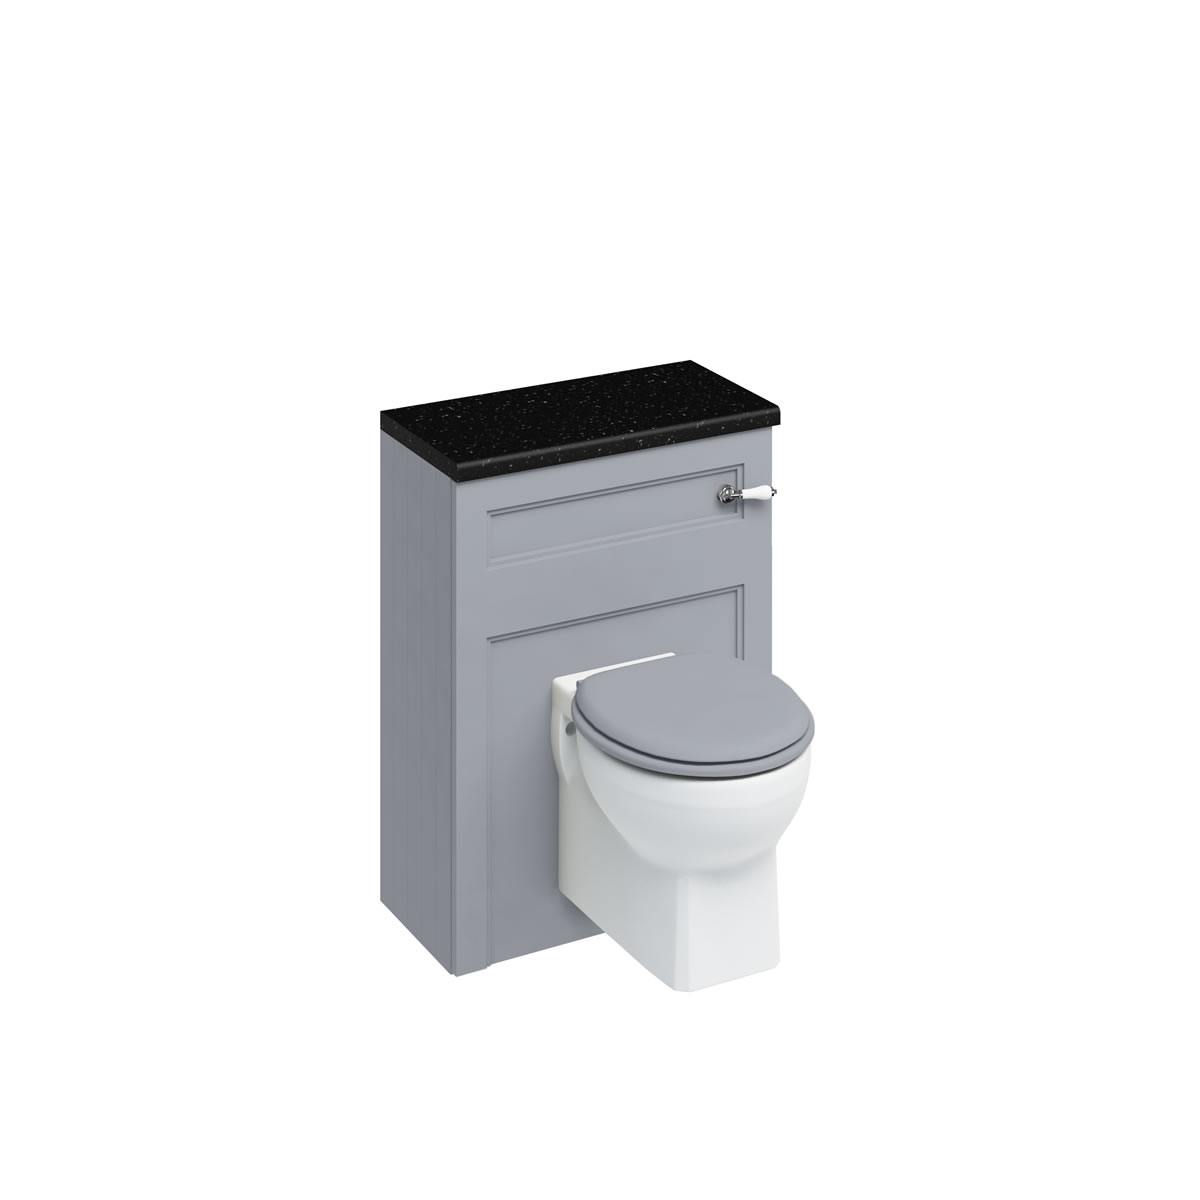 60 Wall hung WC Unit (including the cistern tank - lever flush ) - Classic Grey